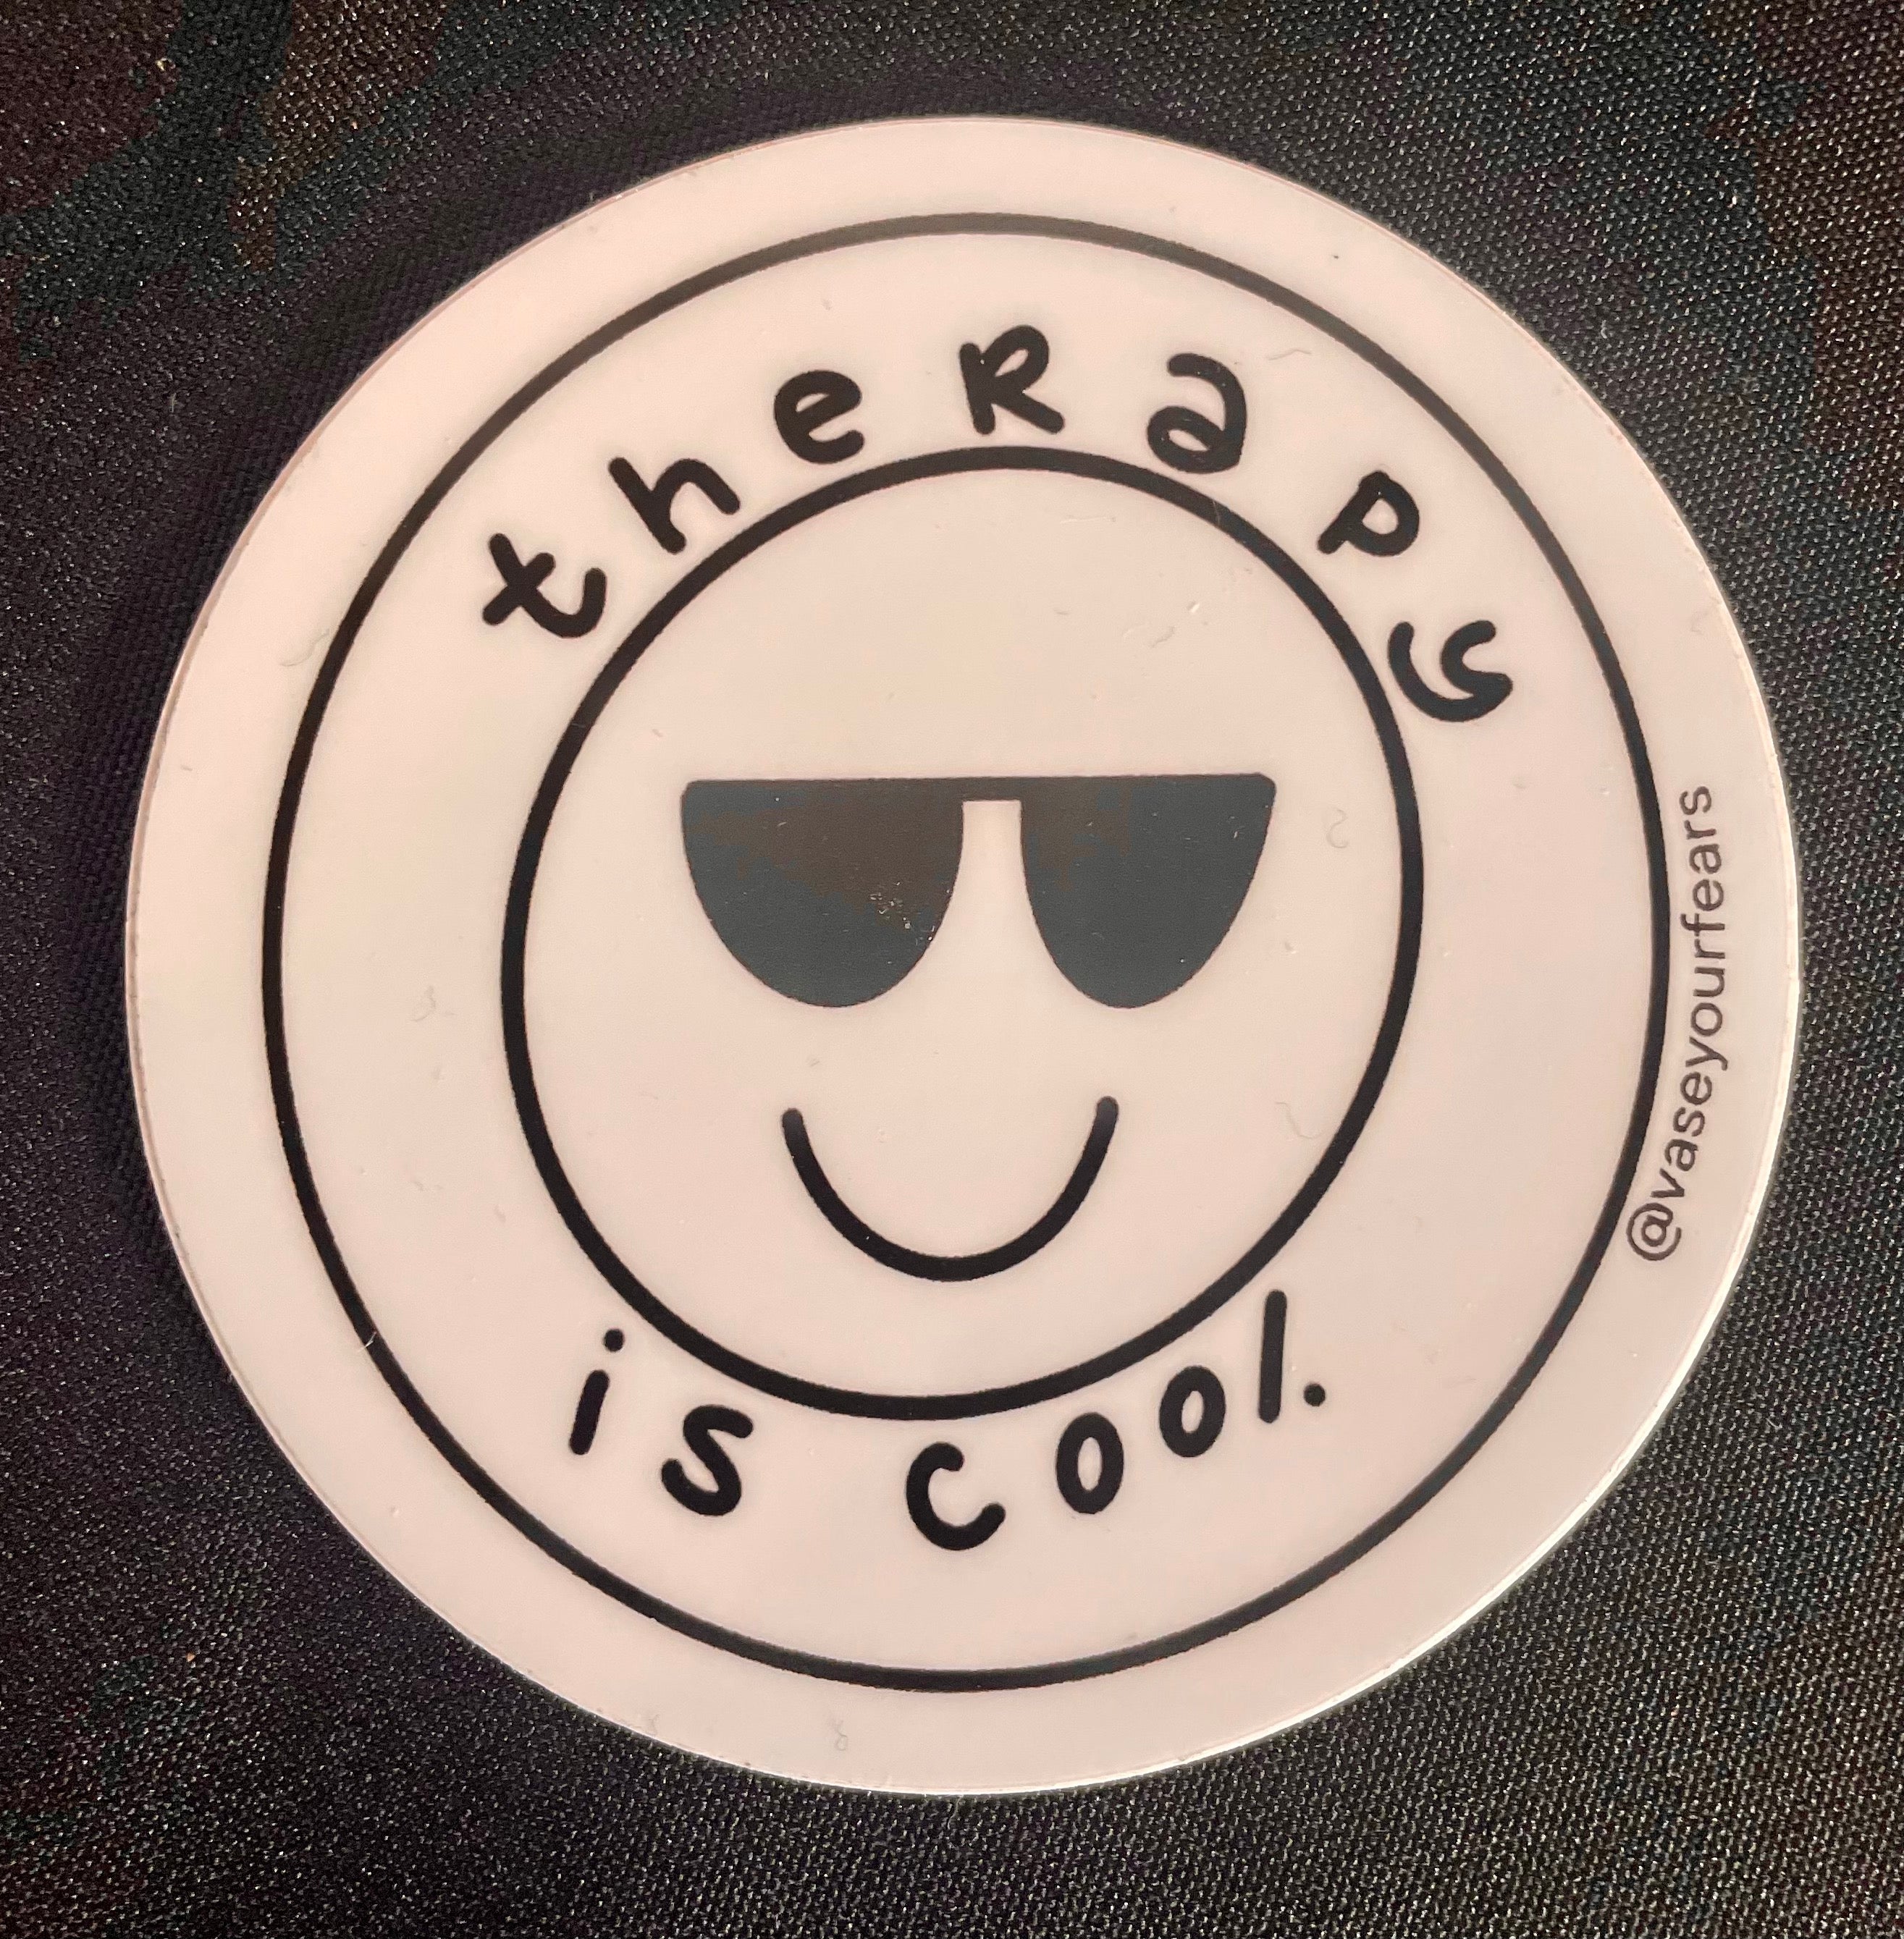 Therapy is Cool Sticker